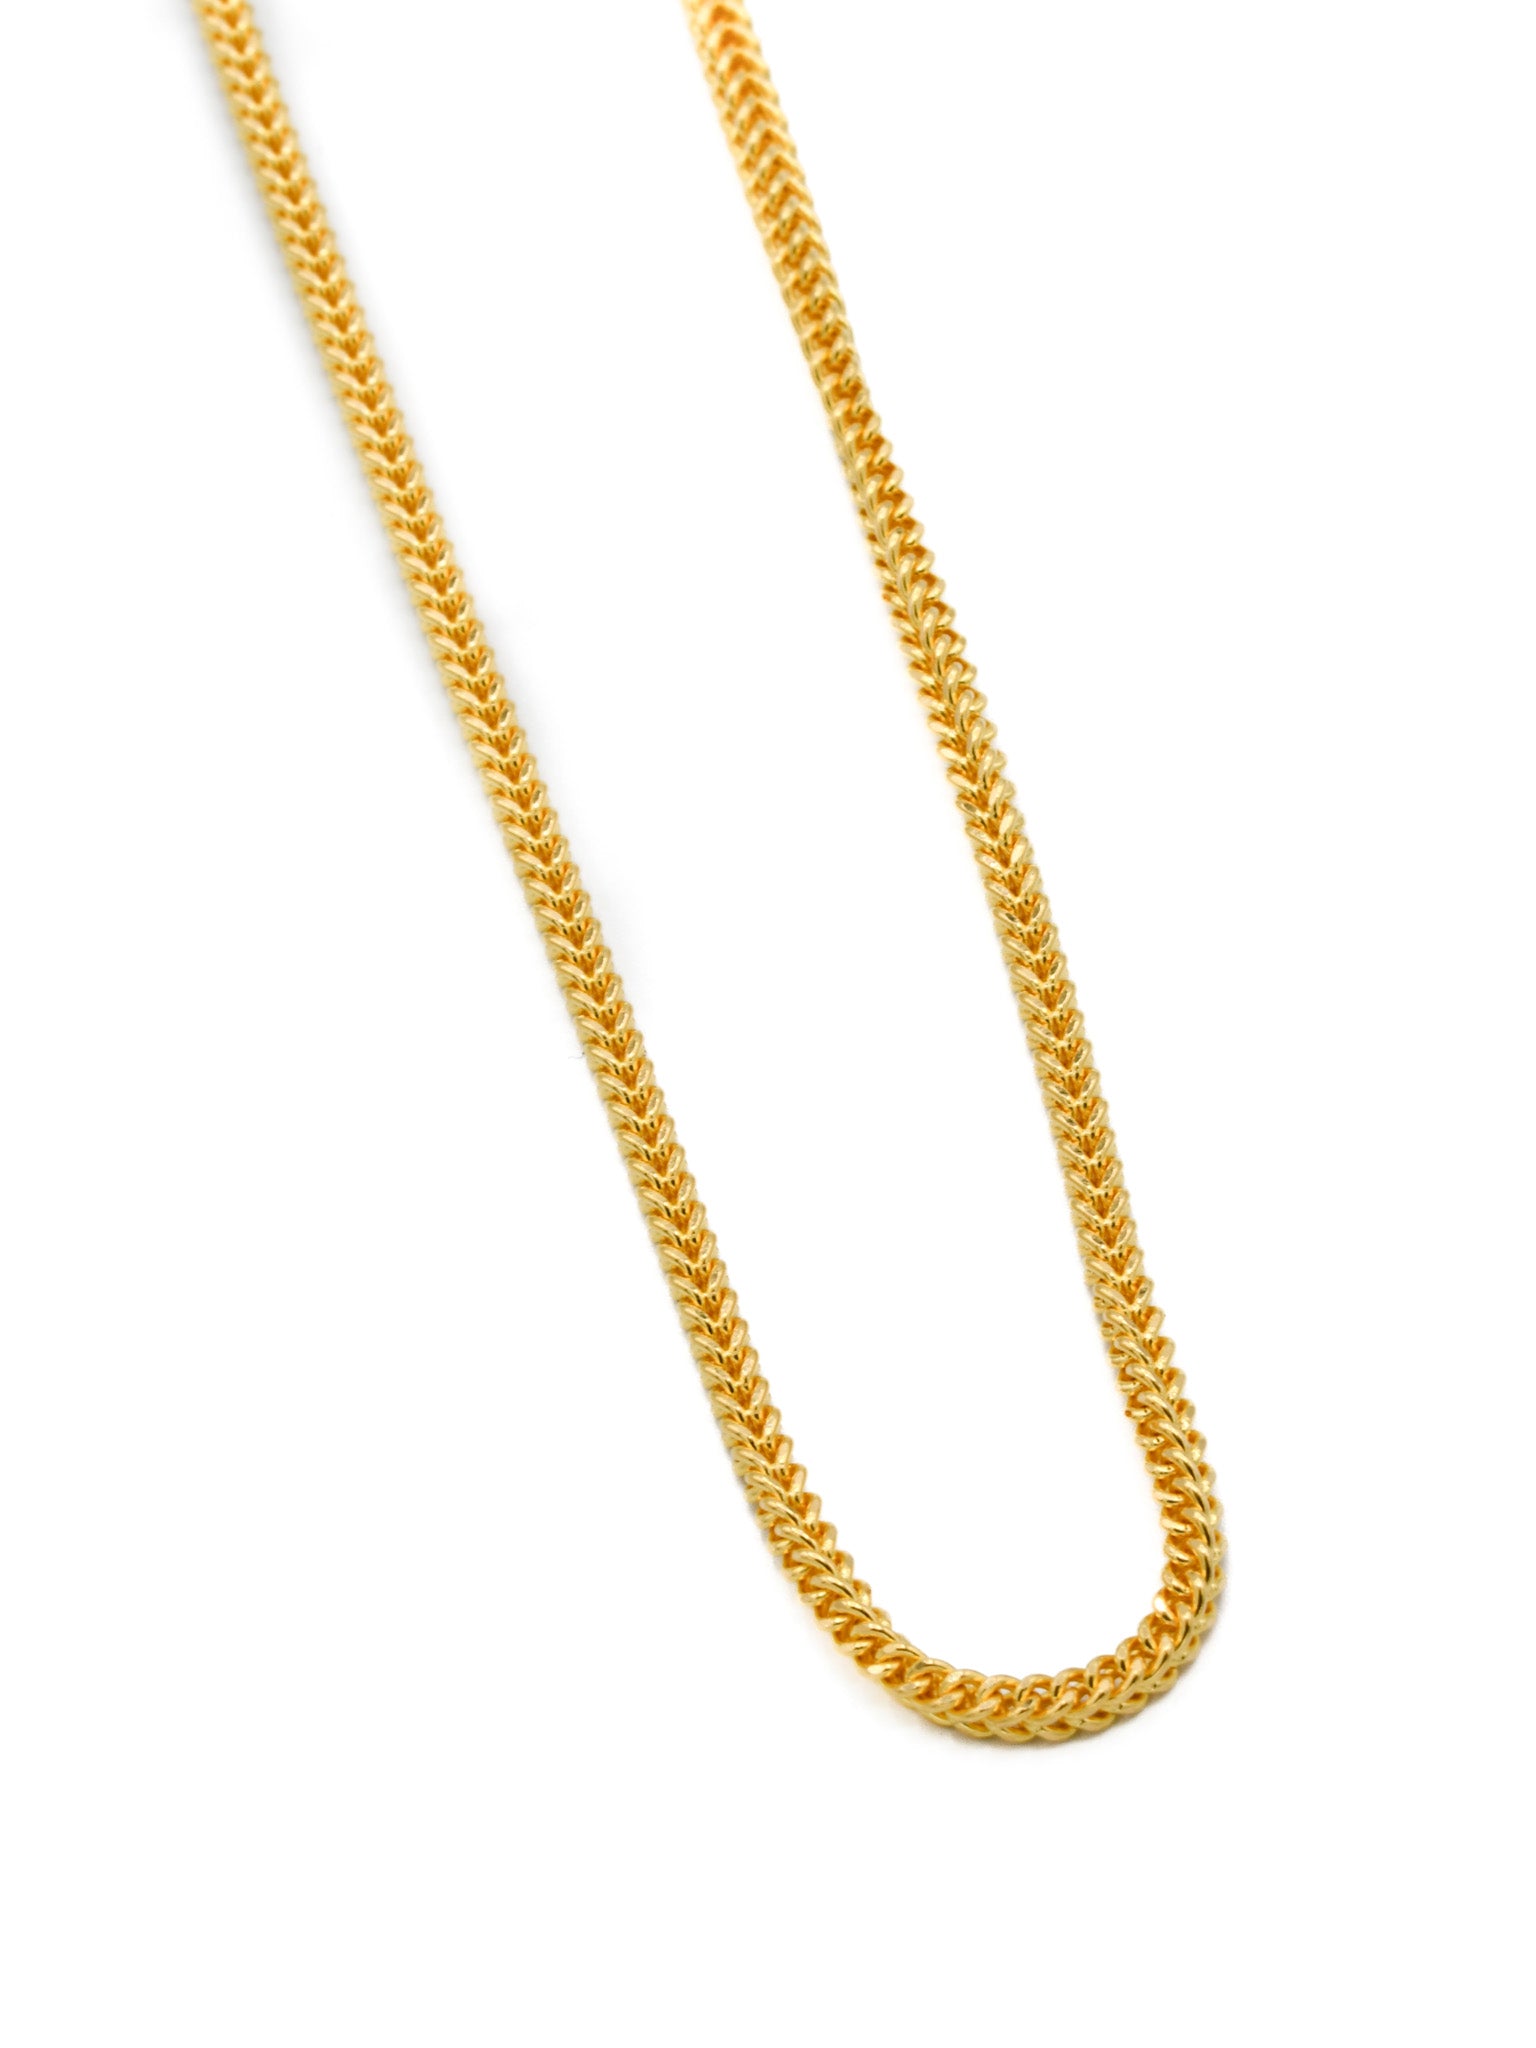 22ct Gold Hollow Fox Tail Chain - 40 cm - Roop Darshan